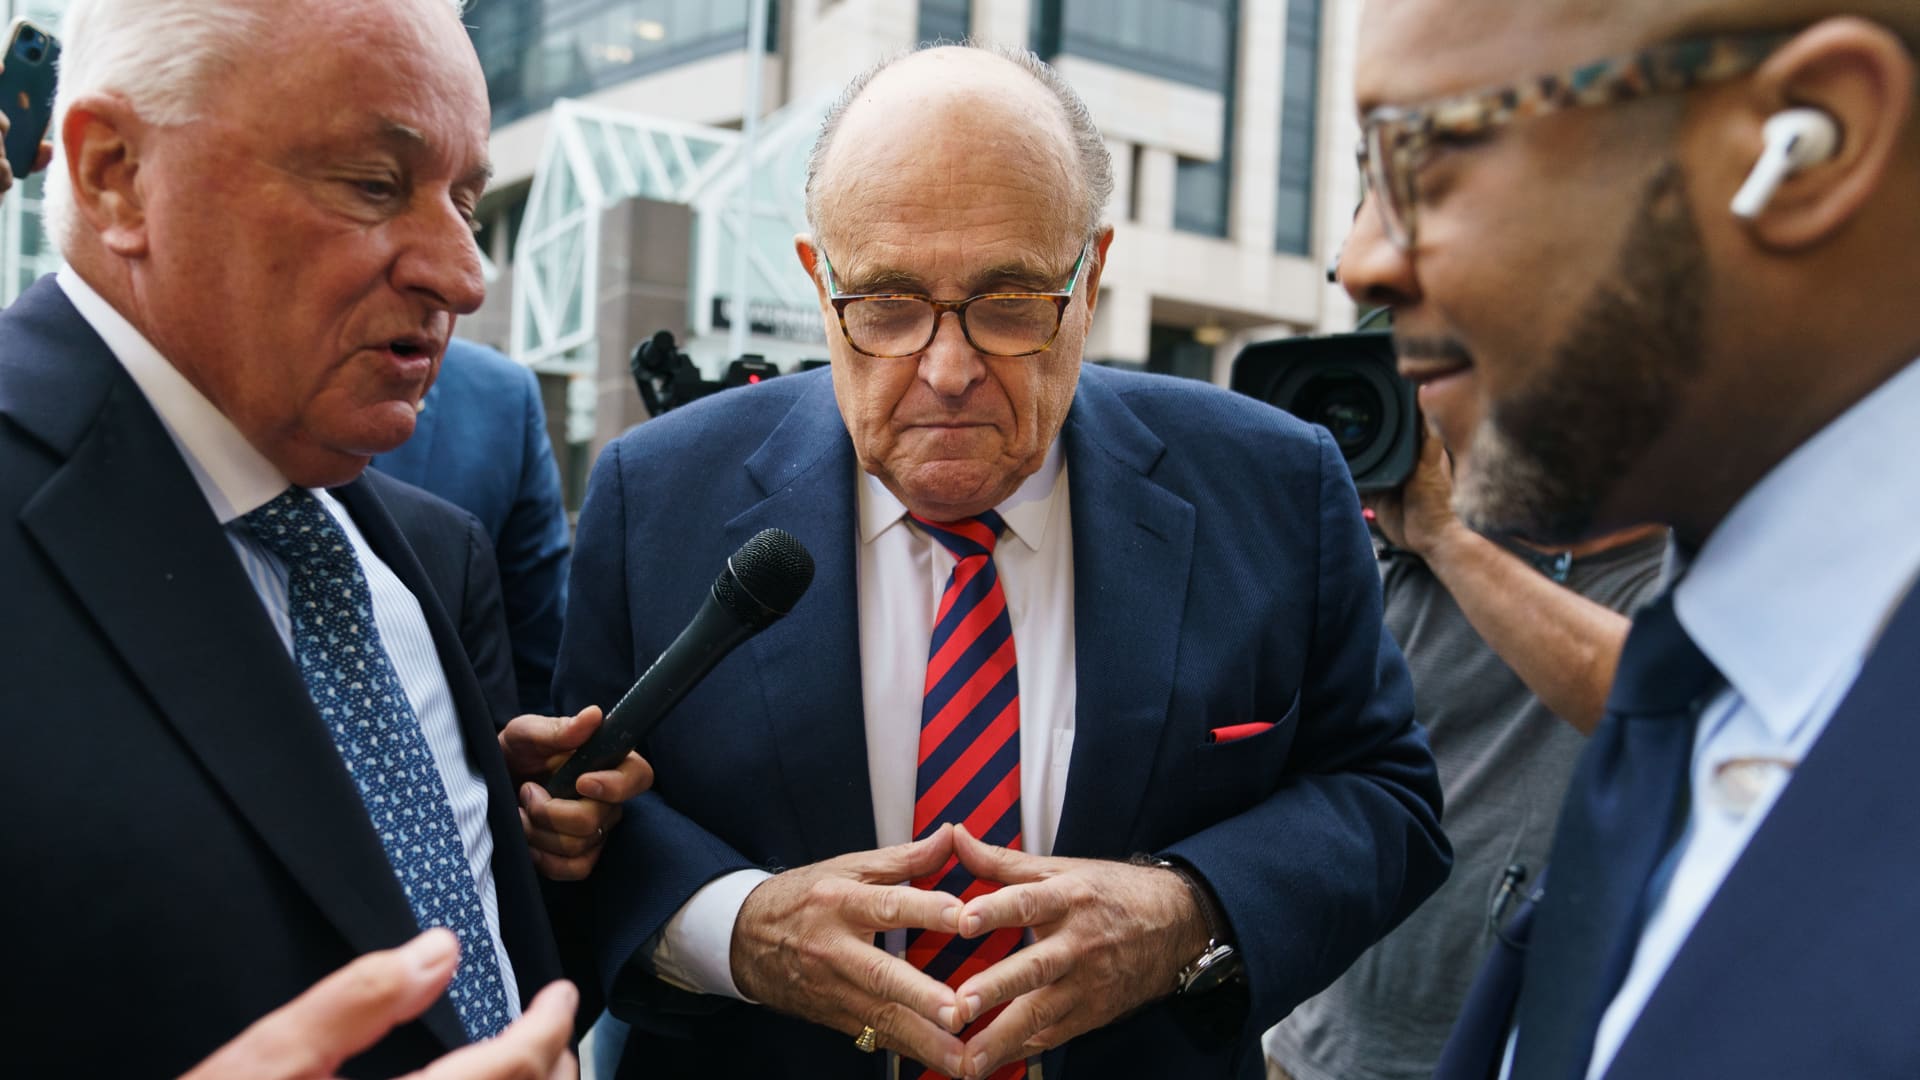 Rudy Giuliani, former lawyer to Donald Trump, his attorney Robert Costello, left, and Vernon Jones, former Republican Representative candidate for Georgia, right, arrive at Fulton County Superior Court in Atlanta, Georgia, US, on Wednesday, Aug. 17, 2022.